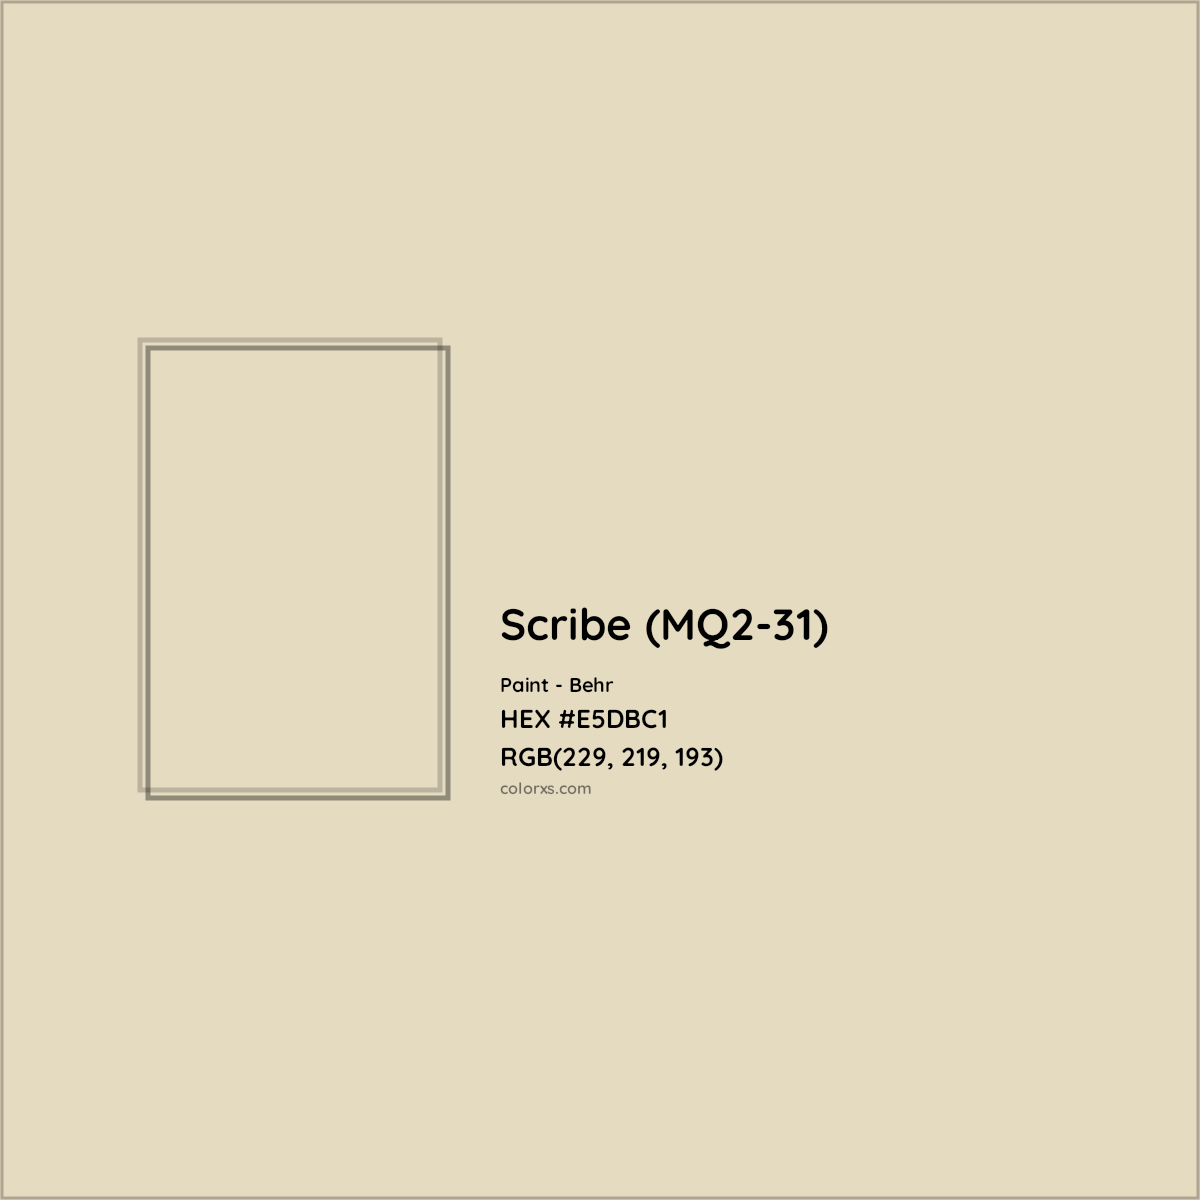 HEX #E5DBC1 Scribe (MQ2-31) Paint Behr - Color Code